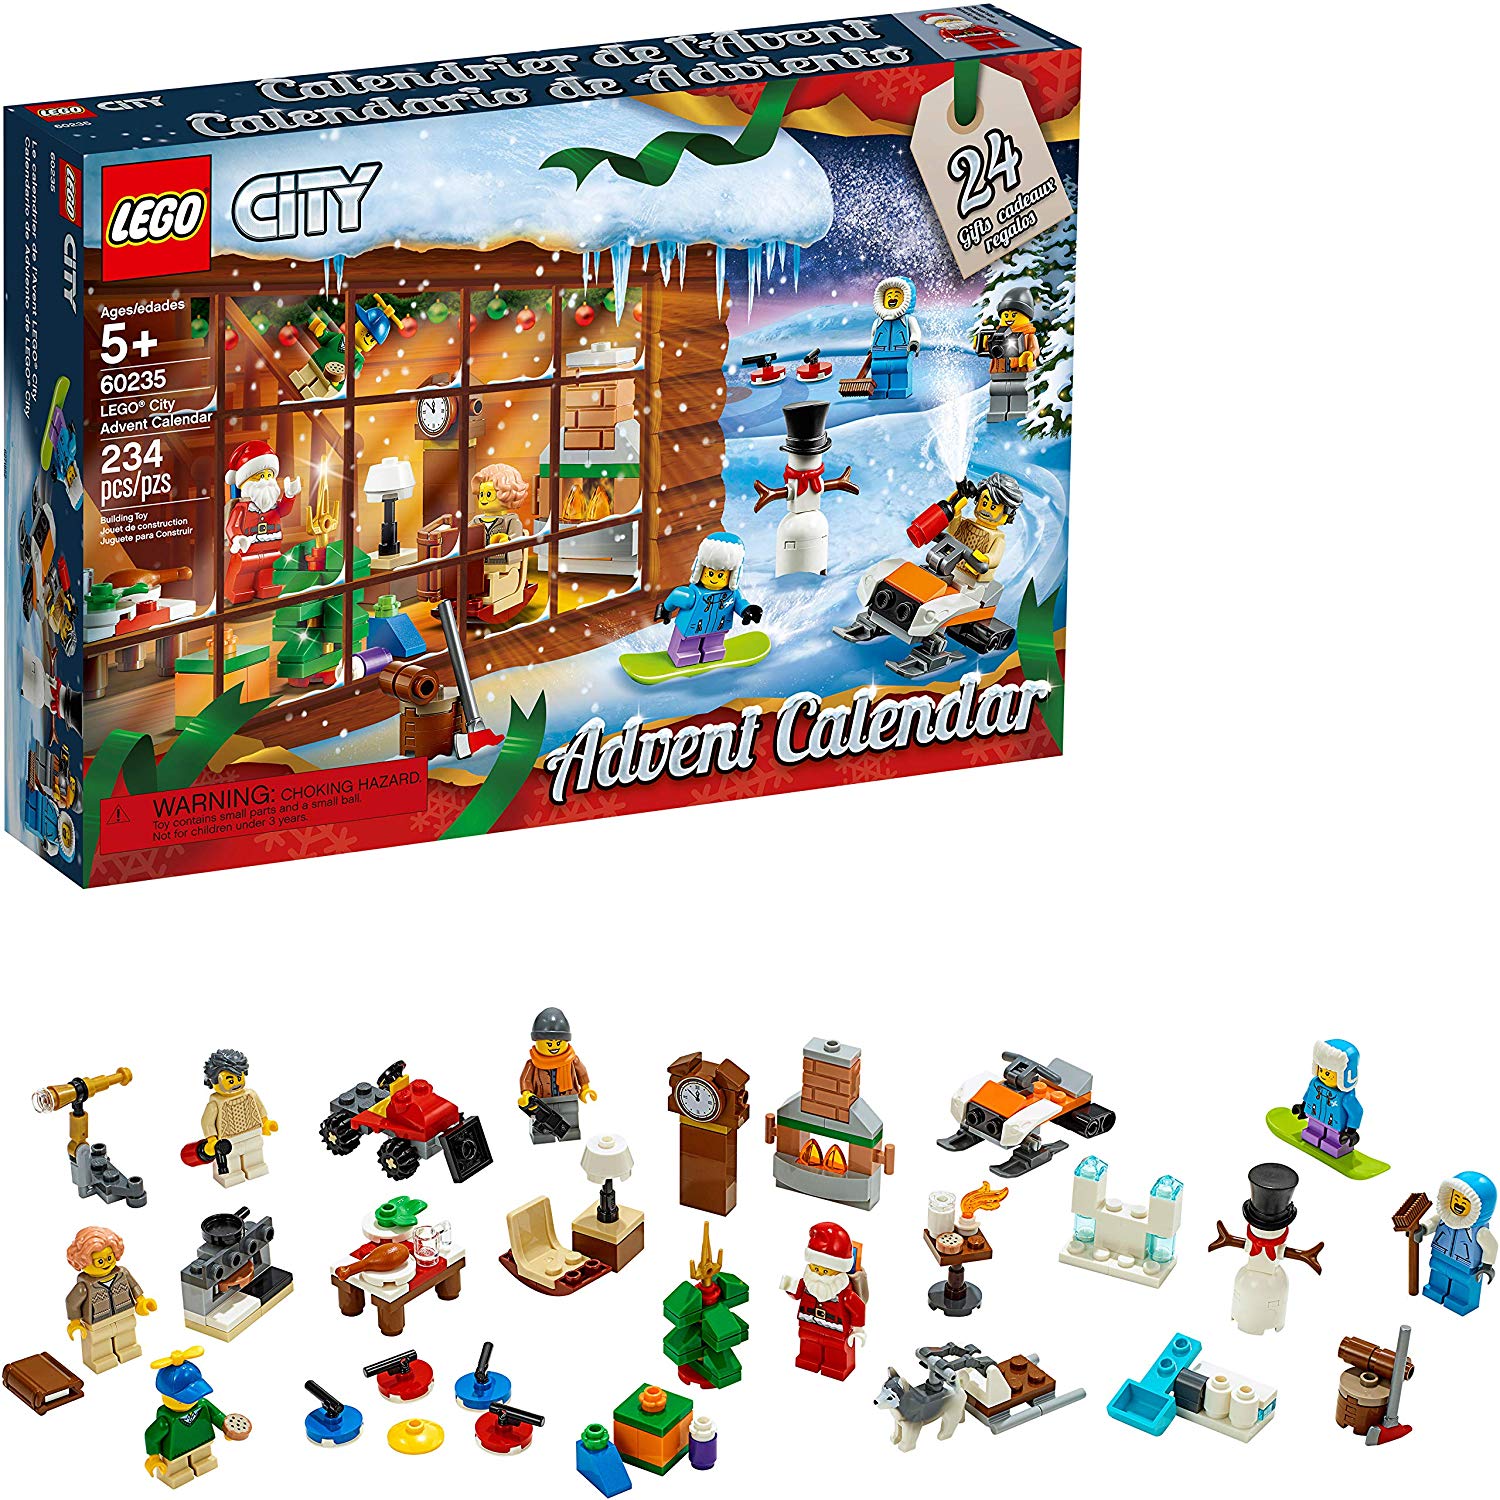 13 Fun Advent Calendars 2019 for Kids and Adults 186